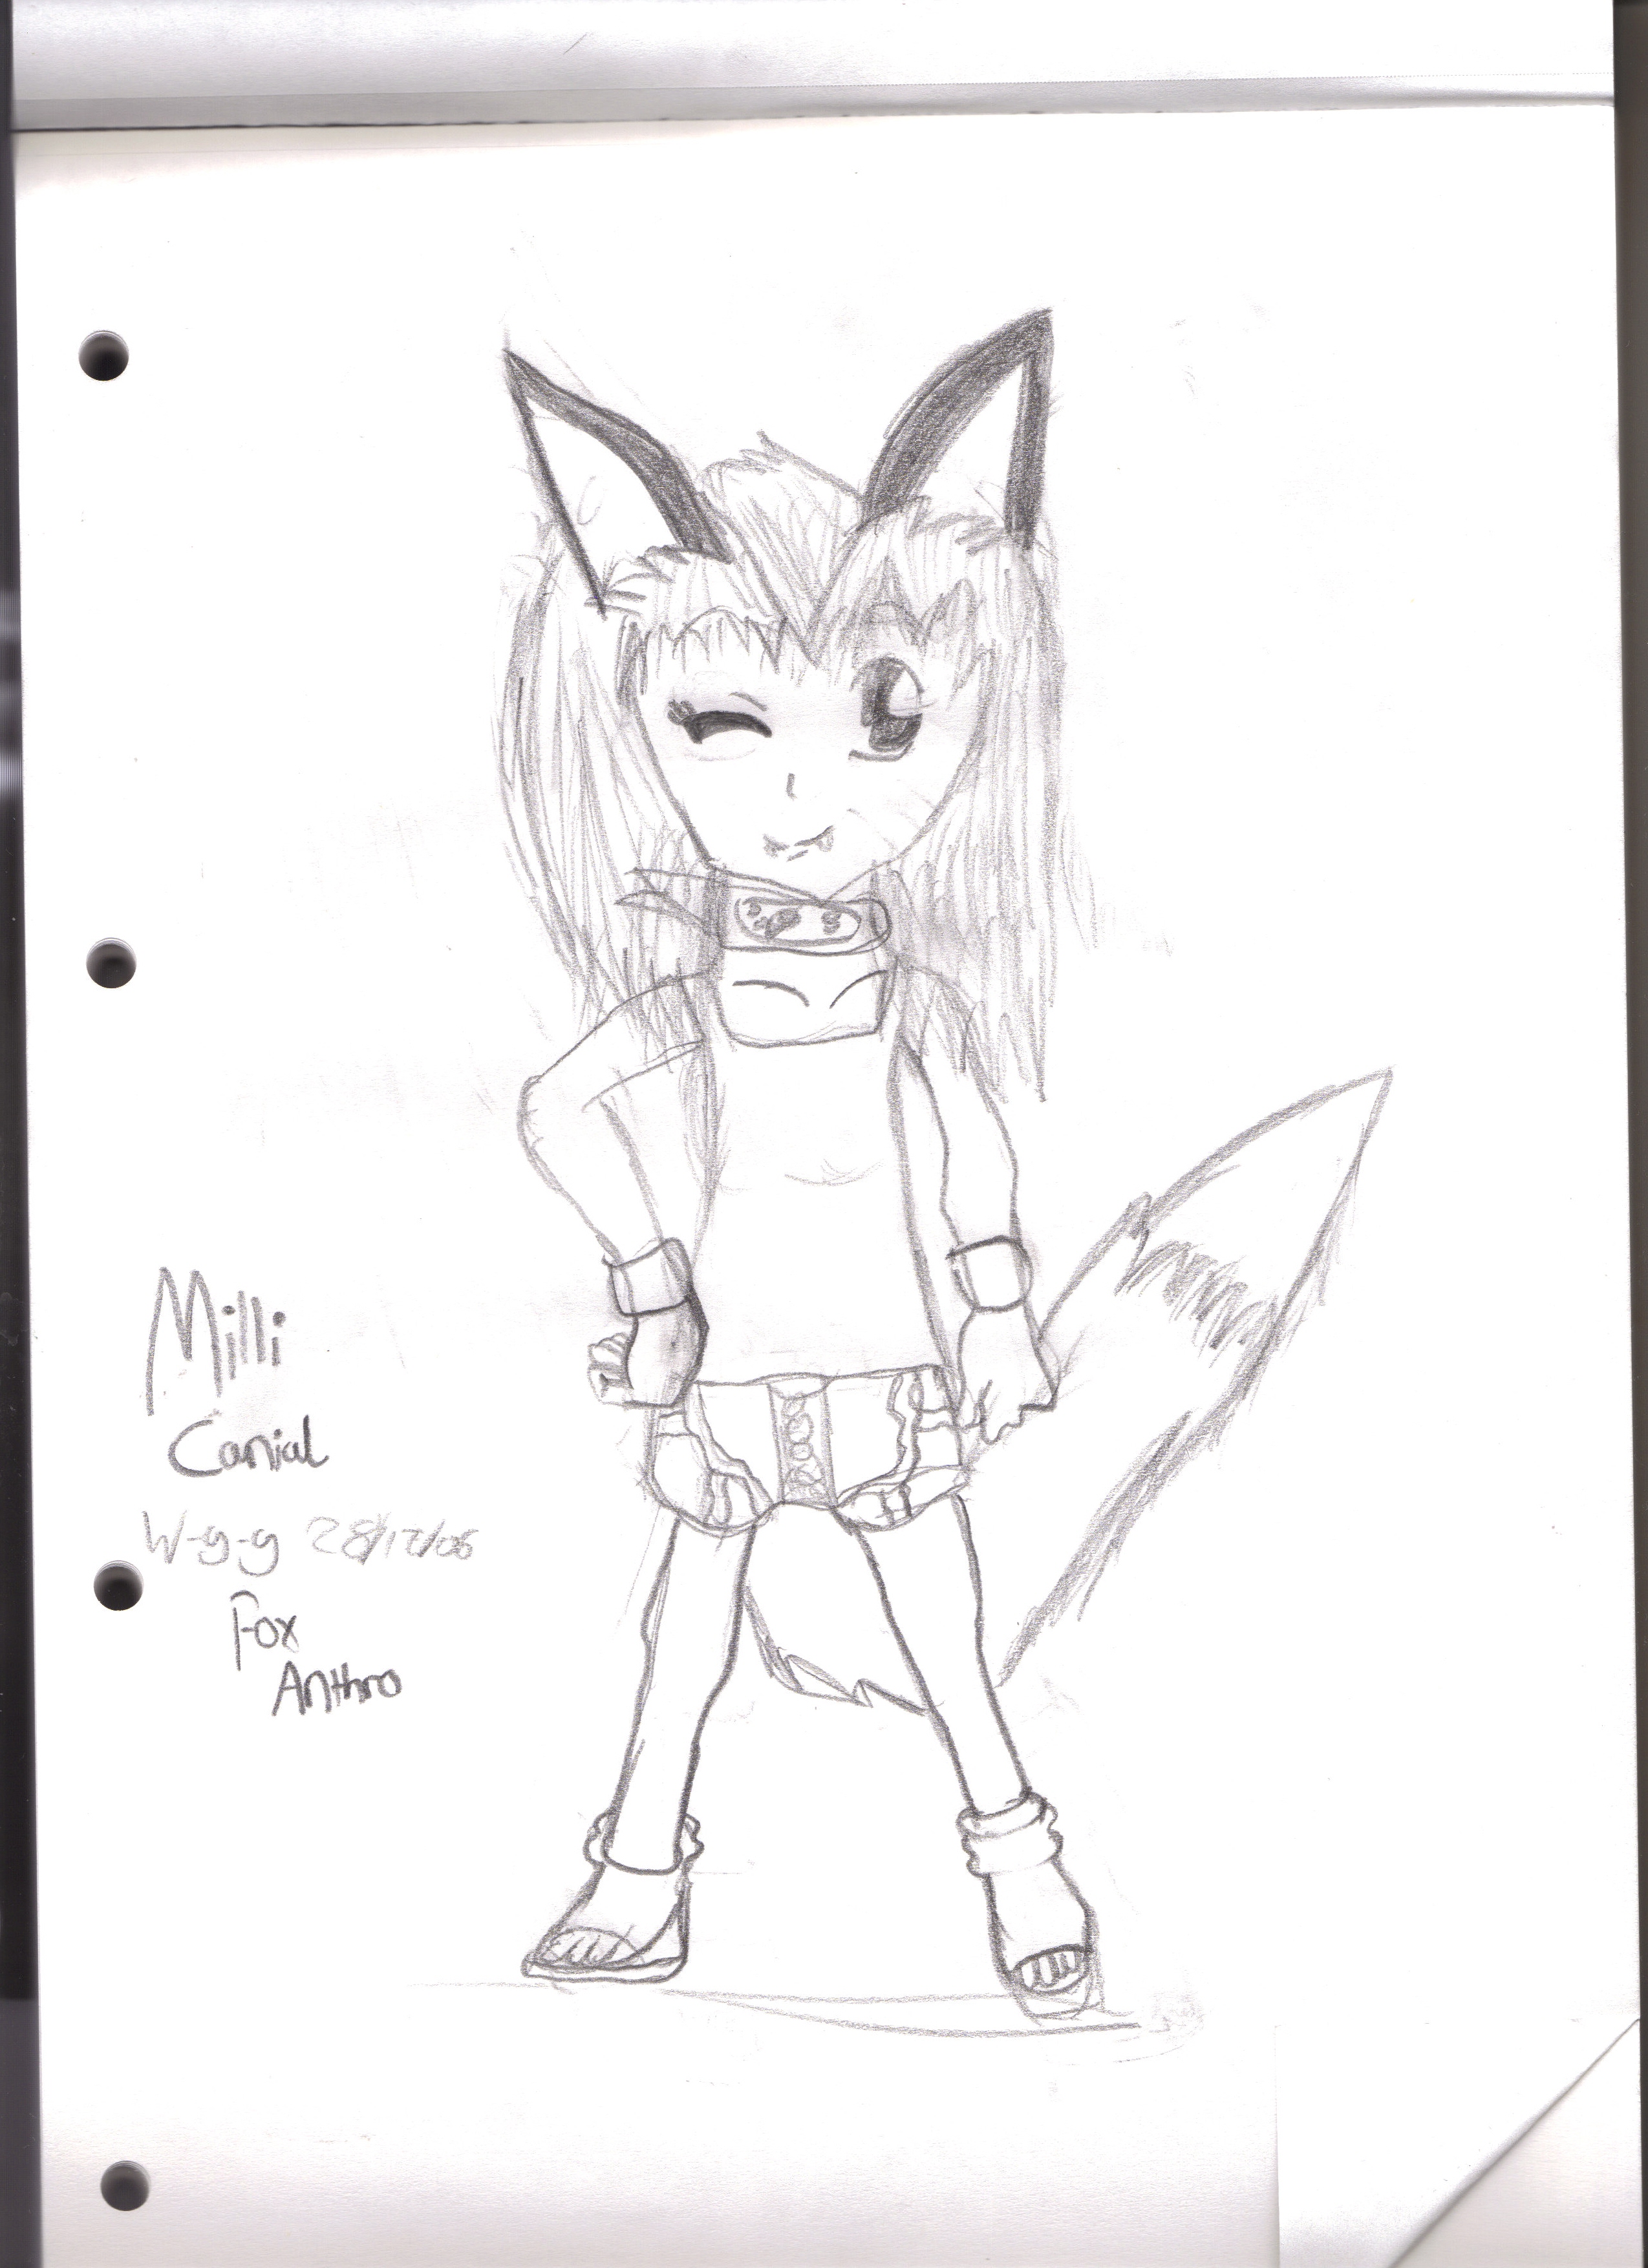 Milli Canial sketch by wolf-girl-ghost